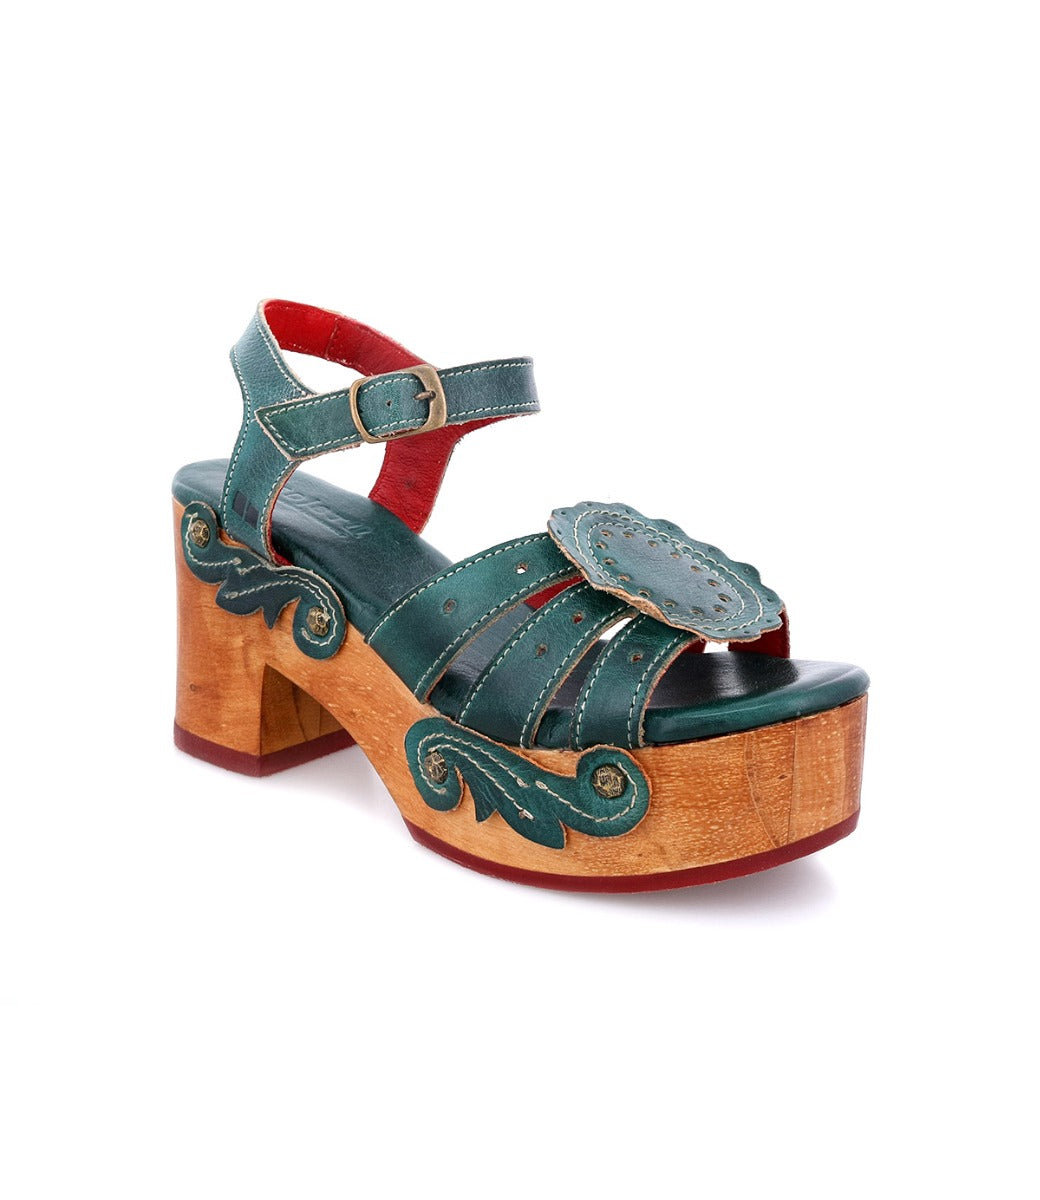 A women's Sabine sandal from Bed Stu with a wooden platform.